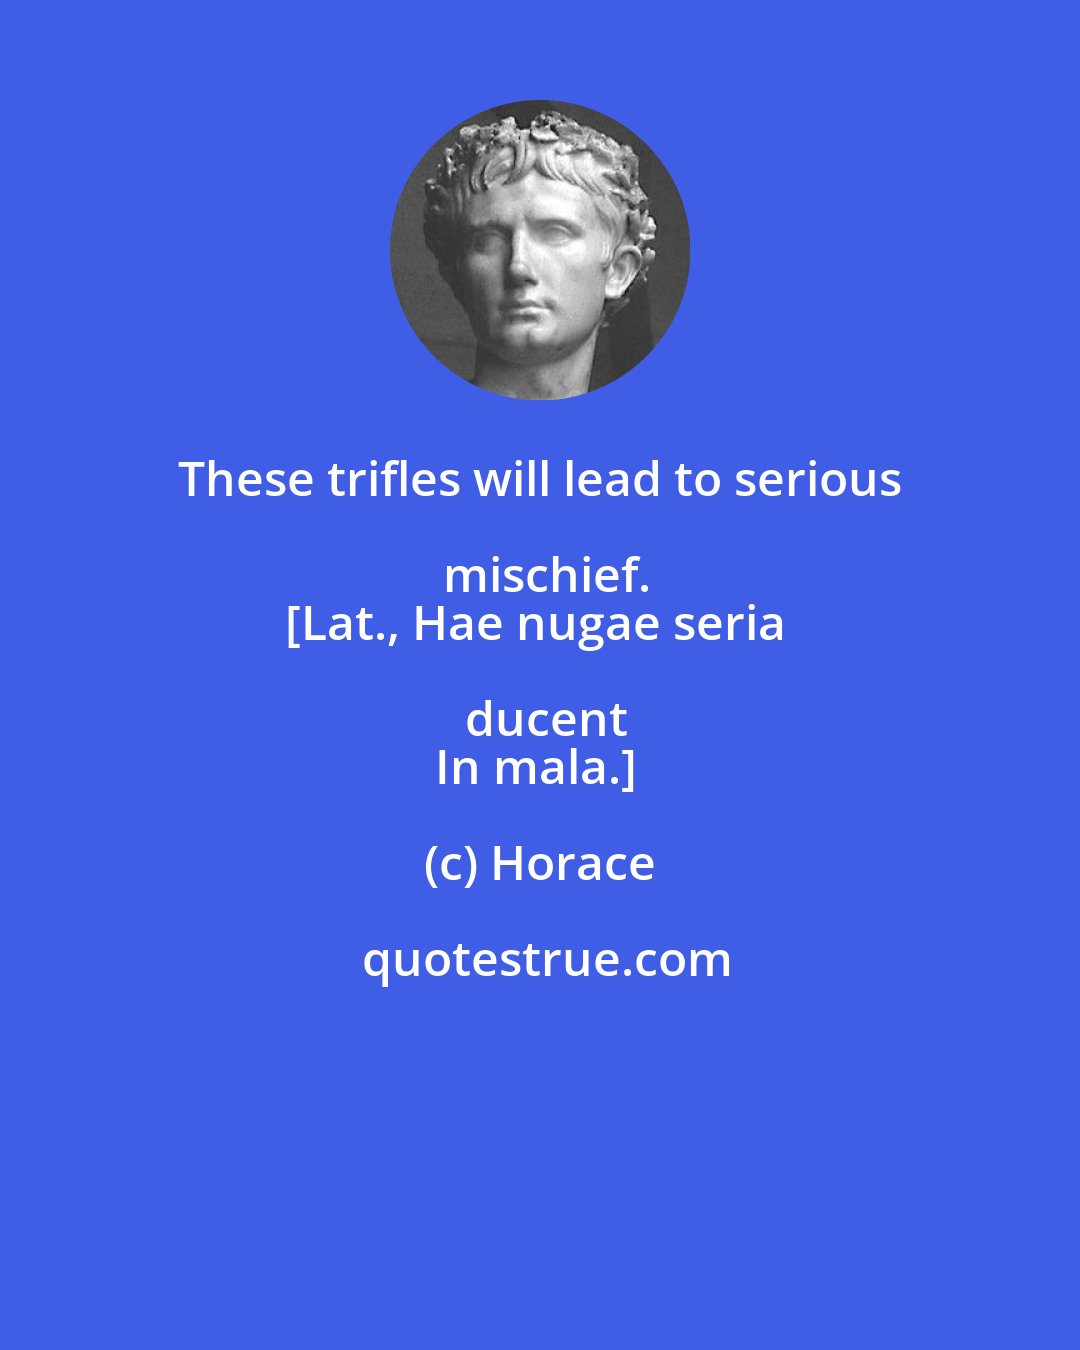 Horace: These trifles will lead to serious mischief.
[Lat., Hae nugae seria ducent
In mala.]